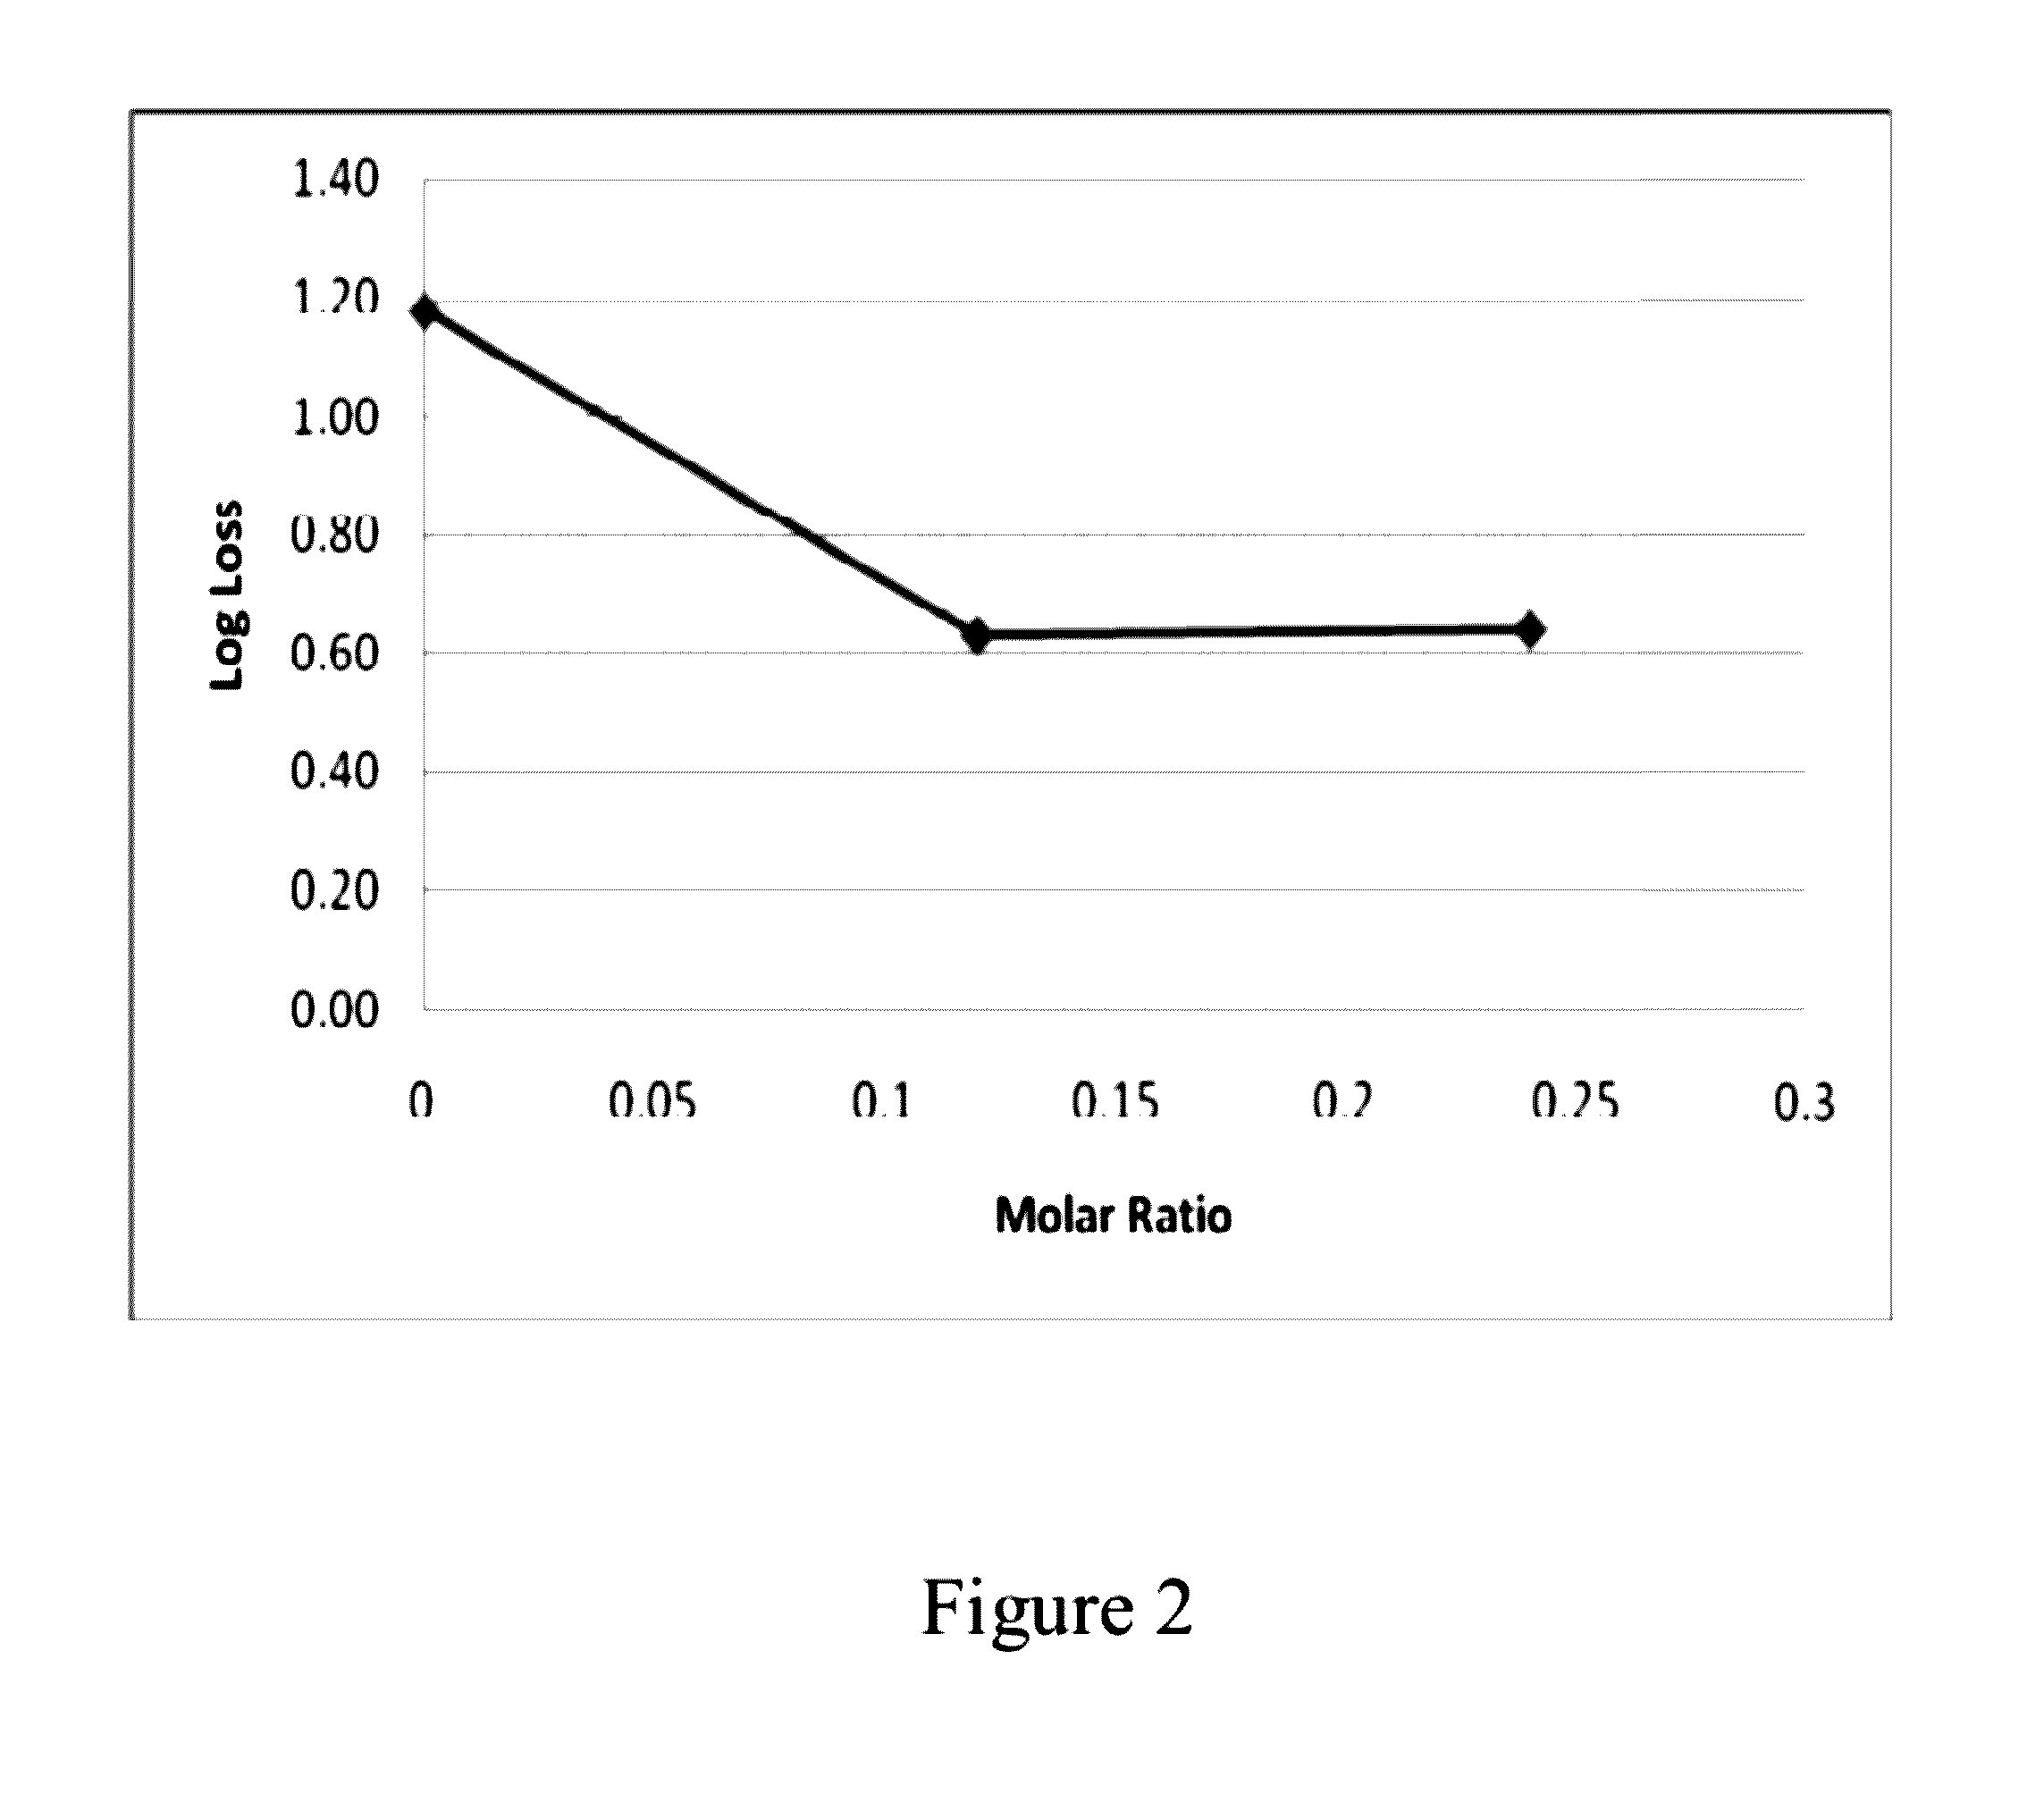 Dry storage stabilizing composition for biological materials